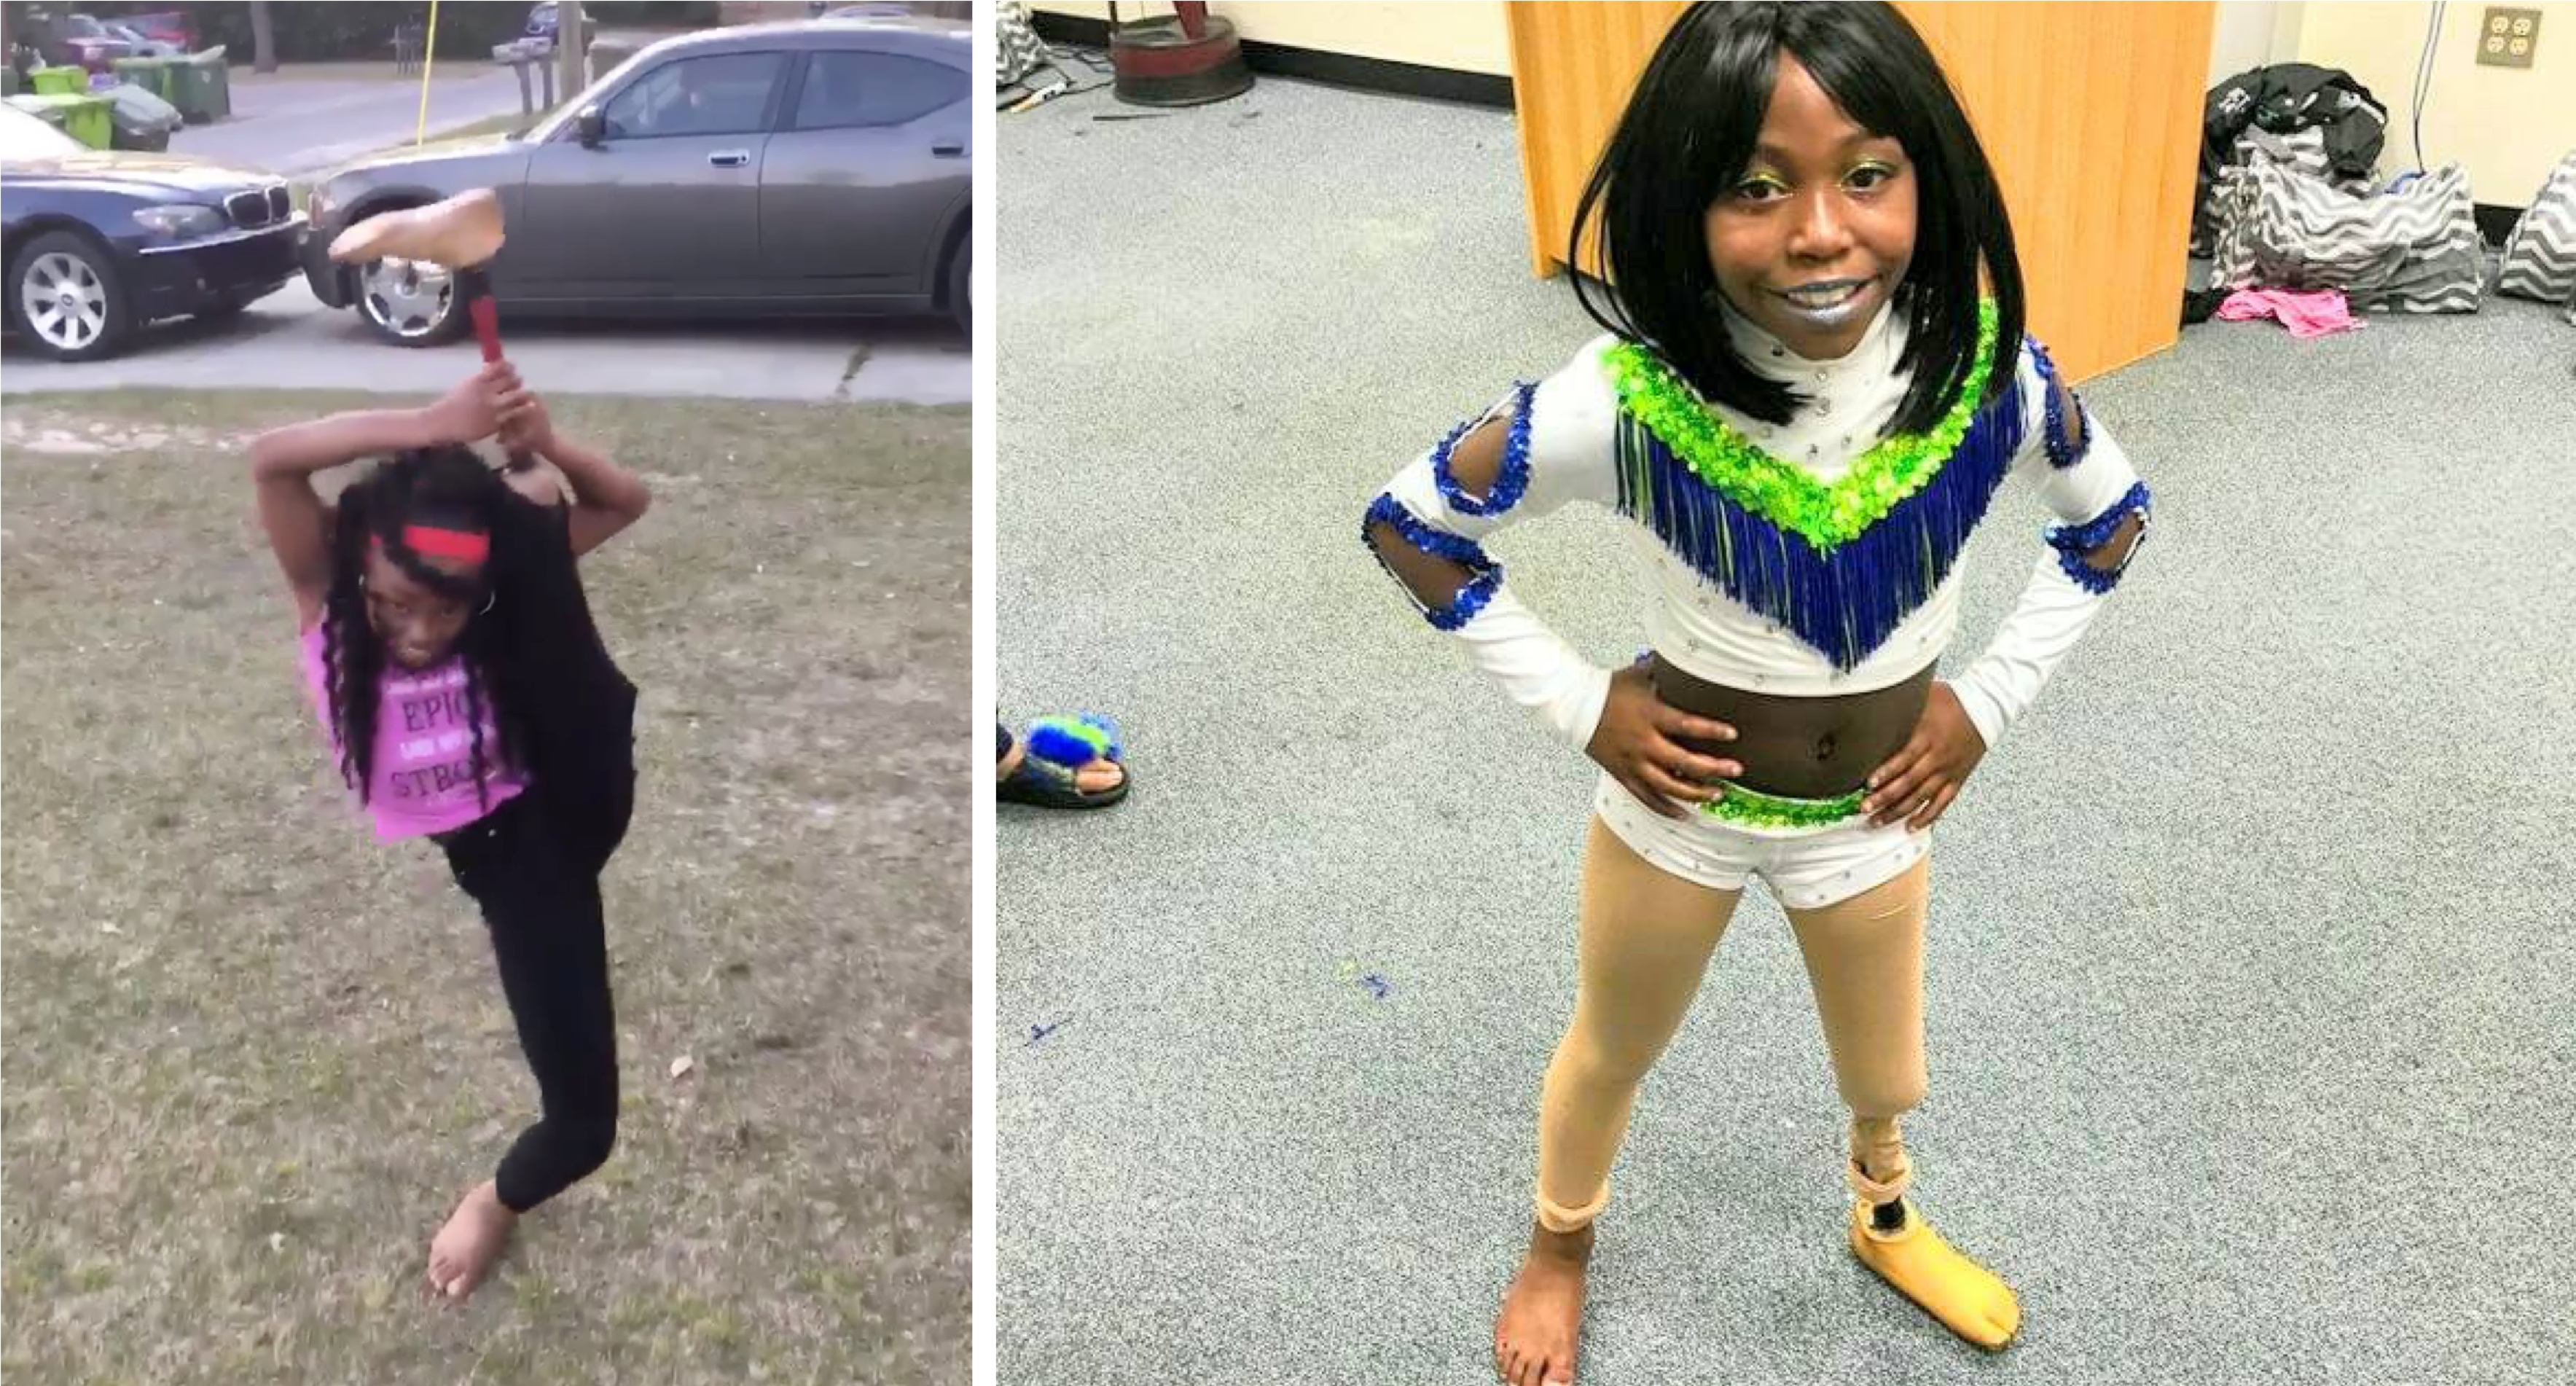 10-Year-Old Gymnast with Prosthetic Leg Goes Viral